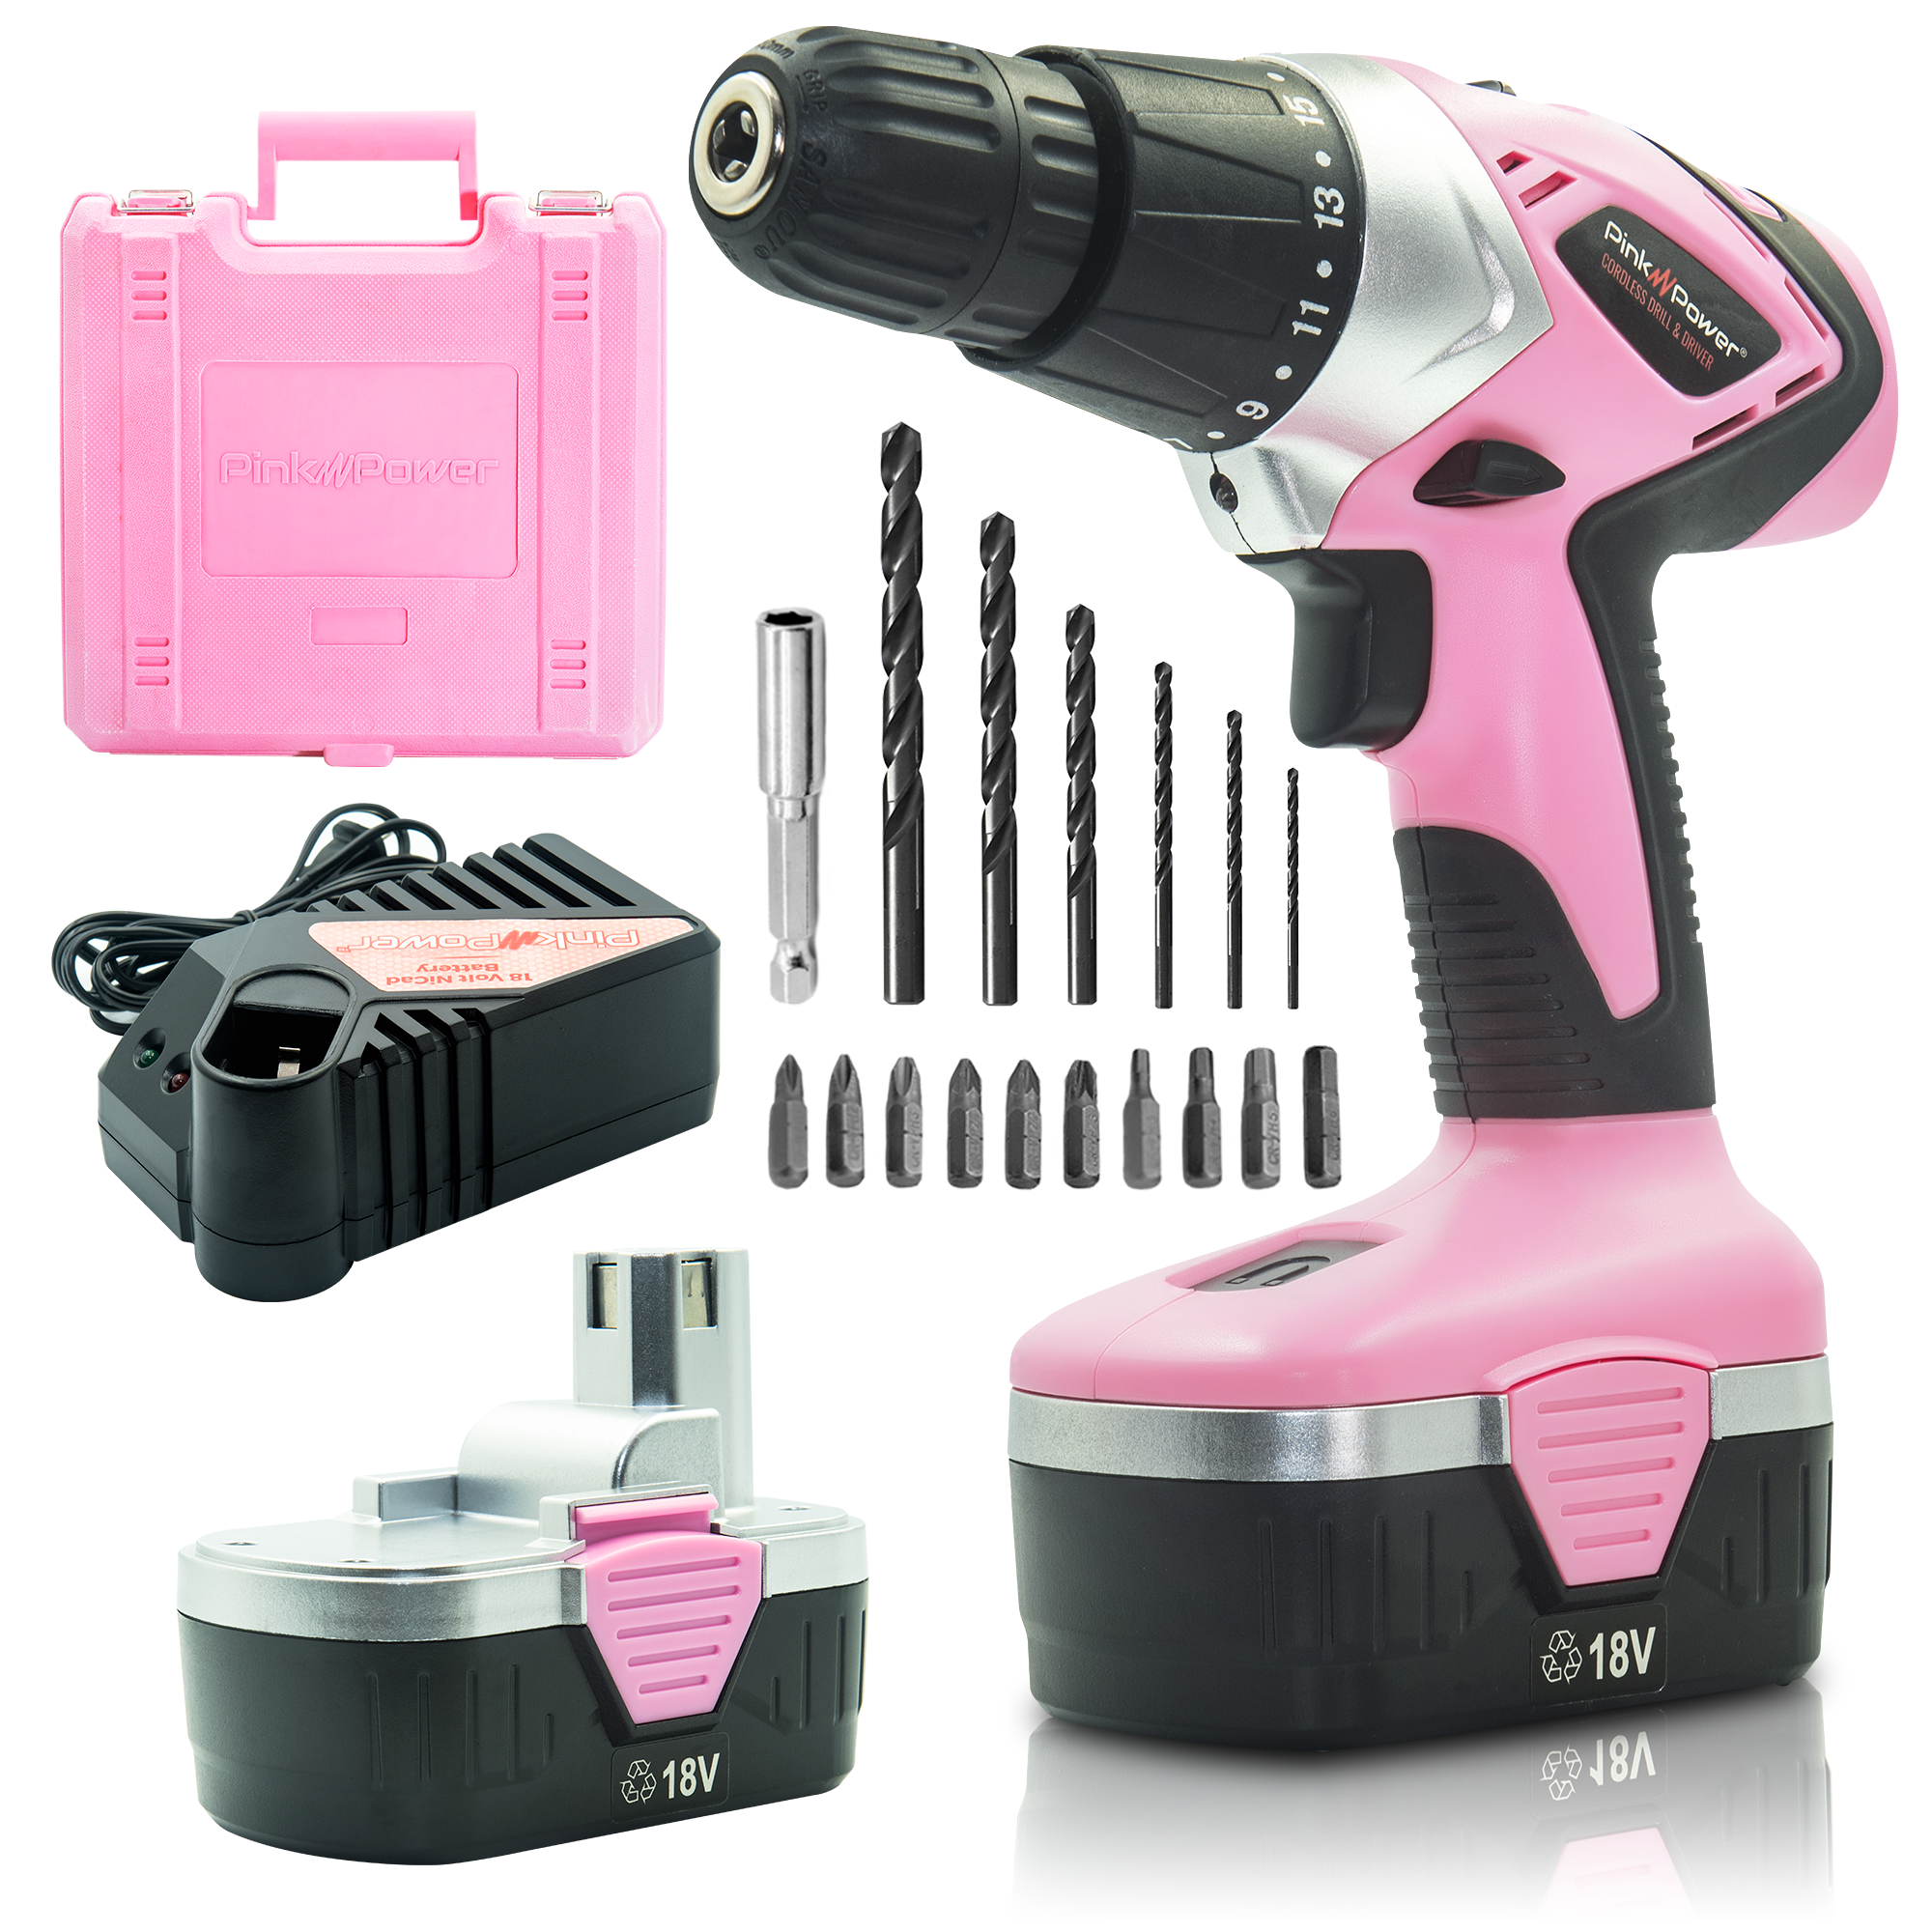 Pink Power Cordless Drill Set for Women - 18V Electric Drill Driver with Tool Case, Batteries, Charger & Drill Bit Set - image 1 of 6